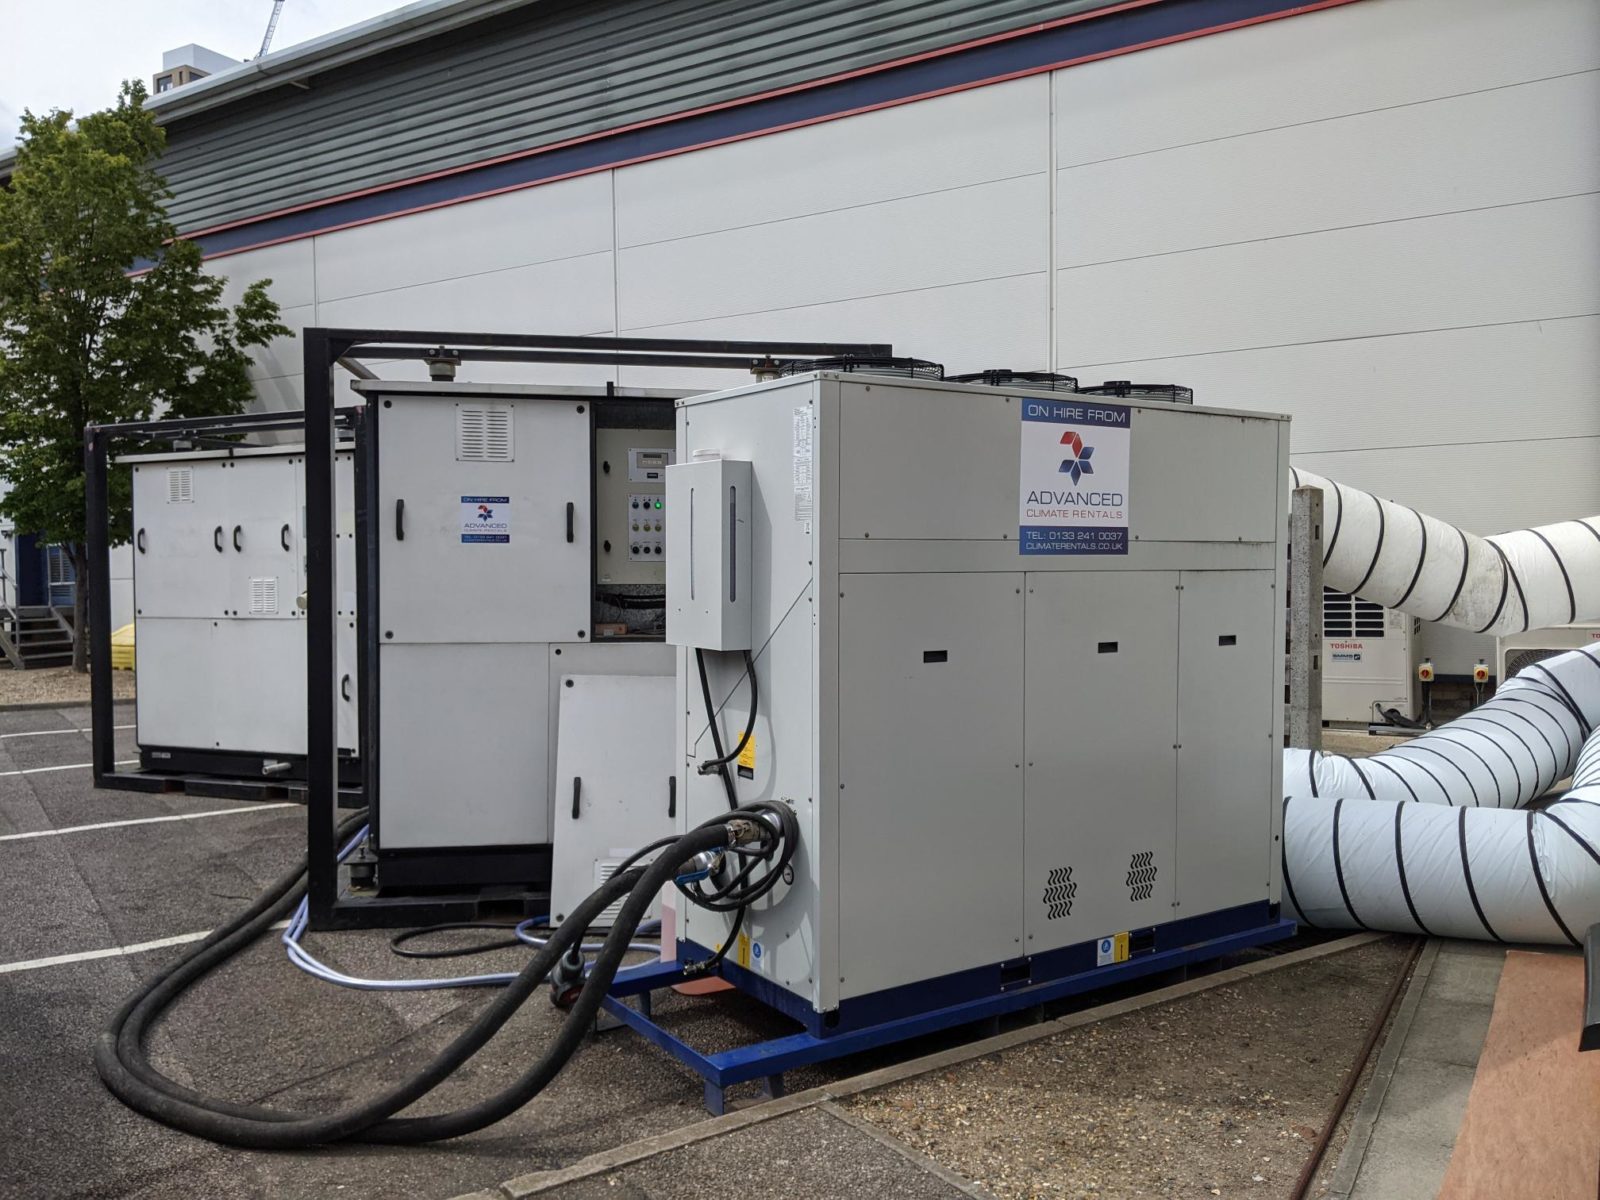 Portable cooling for data centres. Here AHU's and Chillers are positioned outside the building and ductwork used to feed air inside